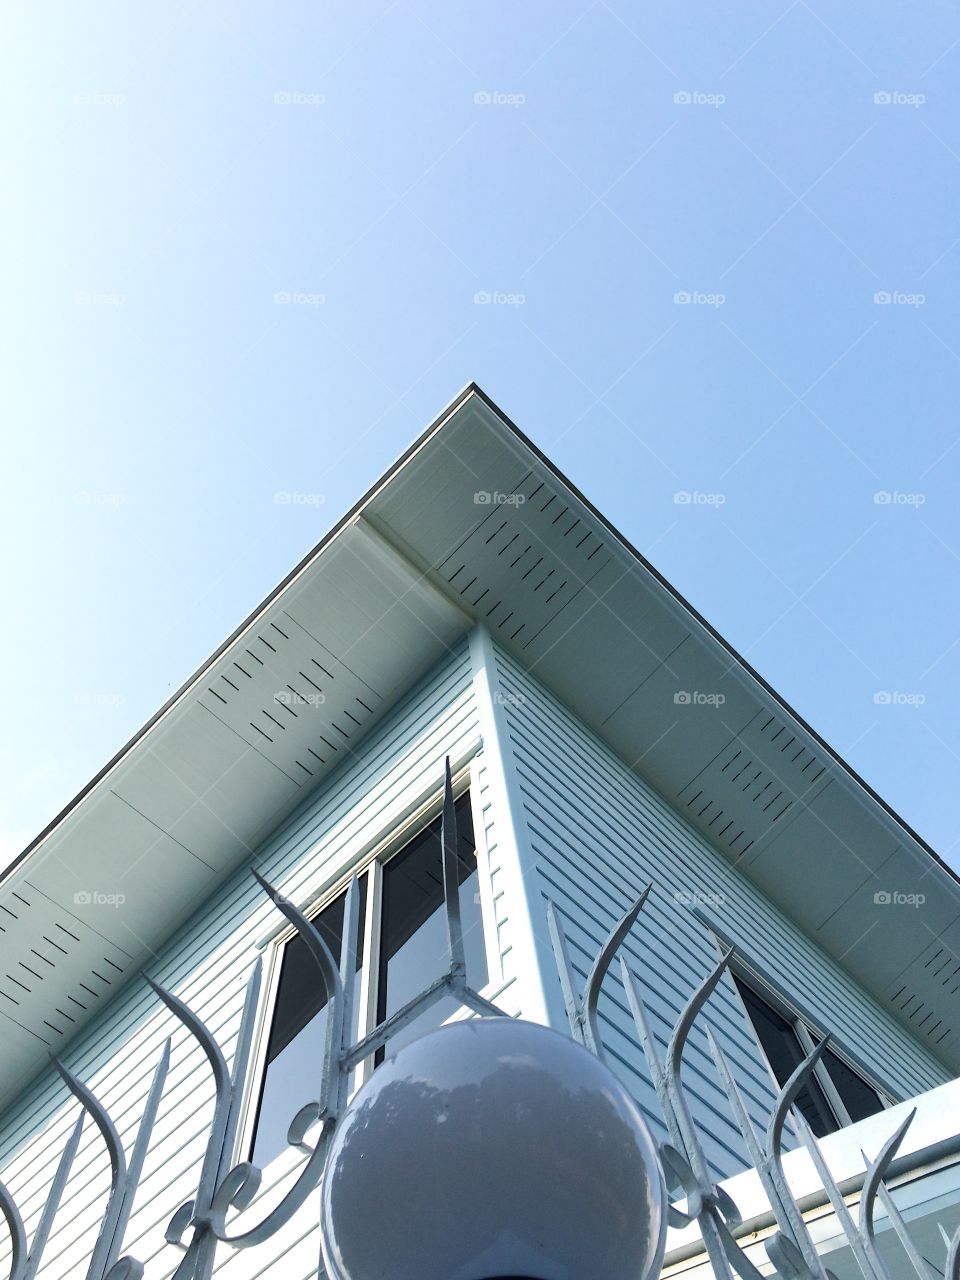 House roof with clear sky background